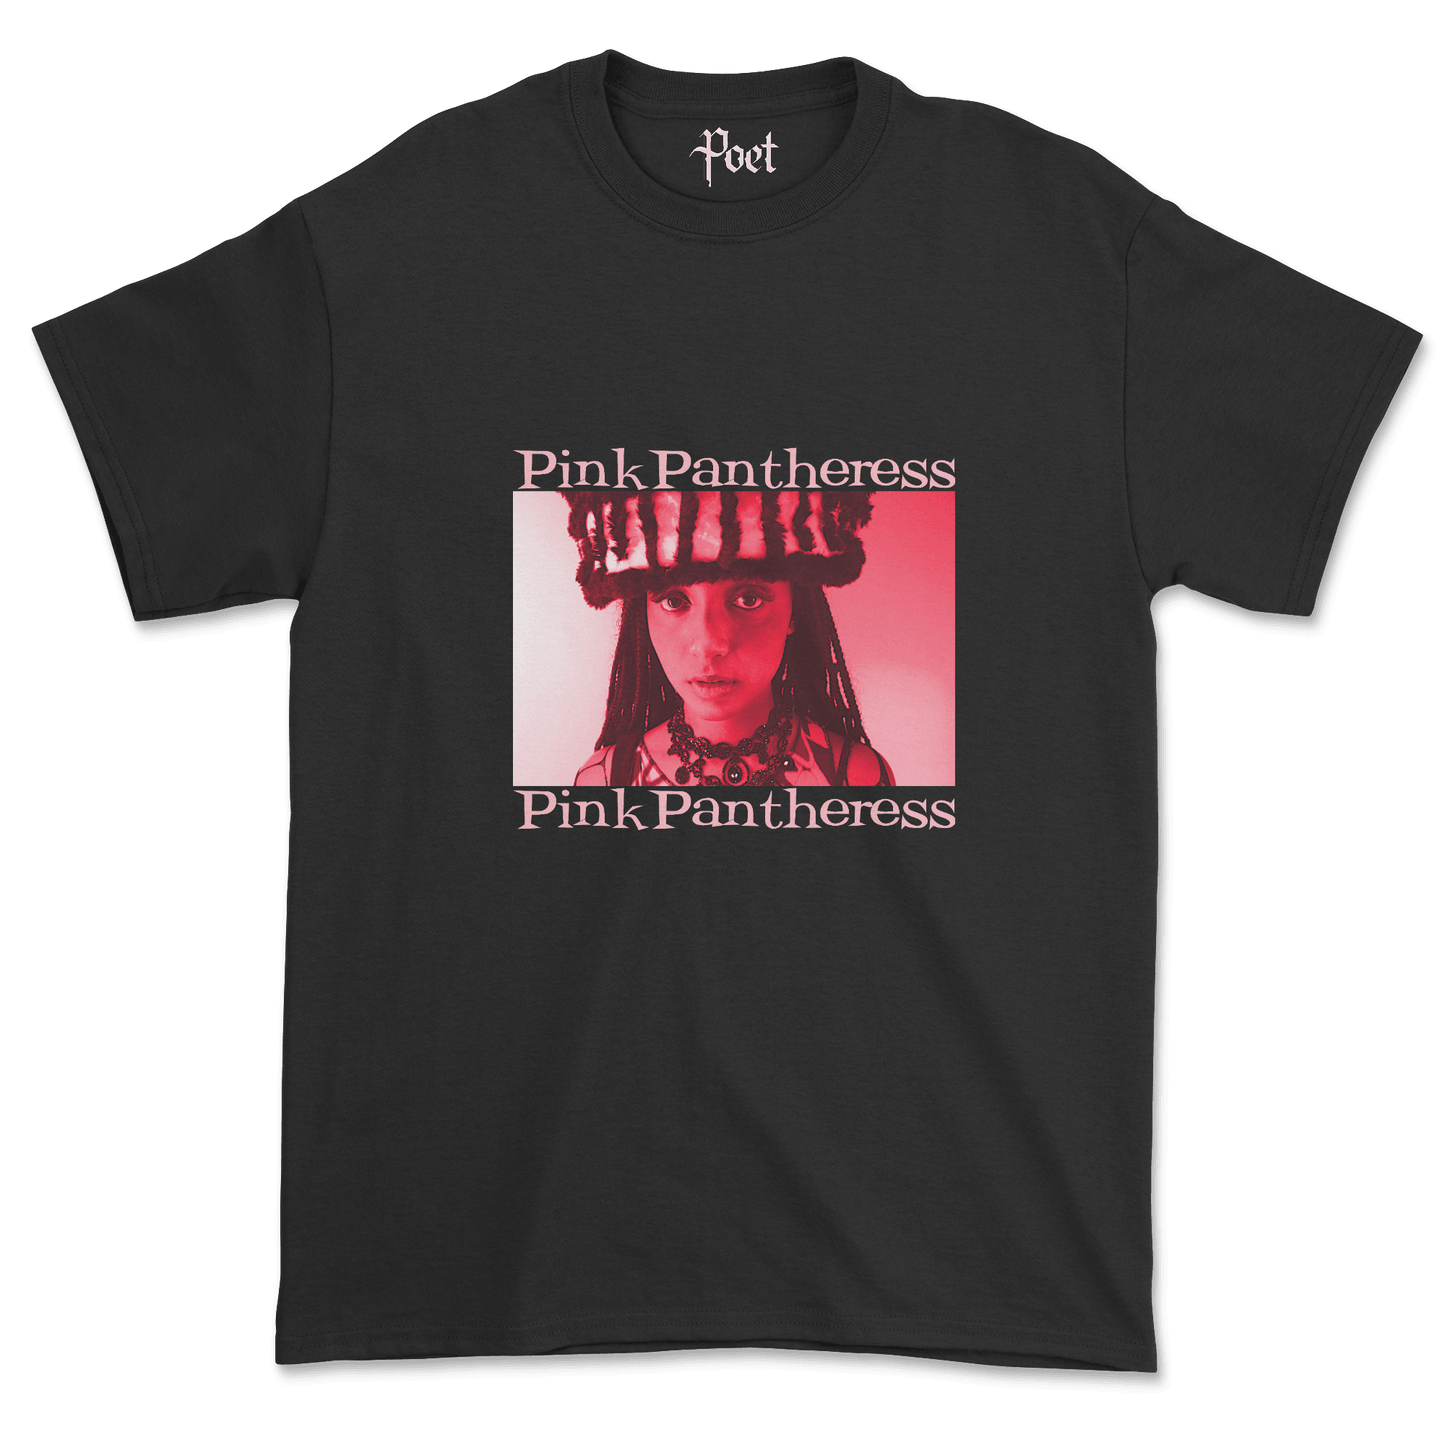 PinkPantheress T-Shirt - Poet Archives